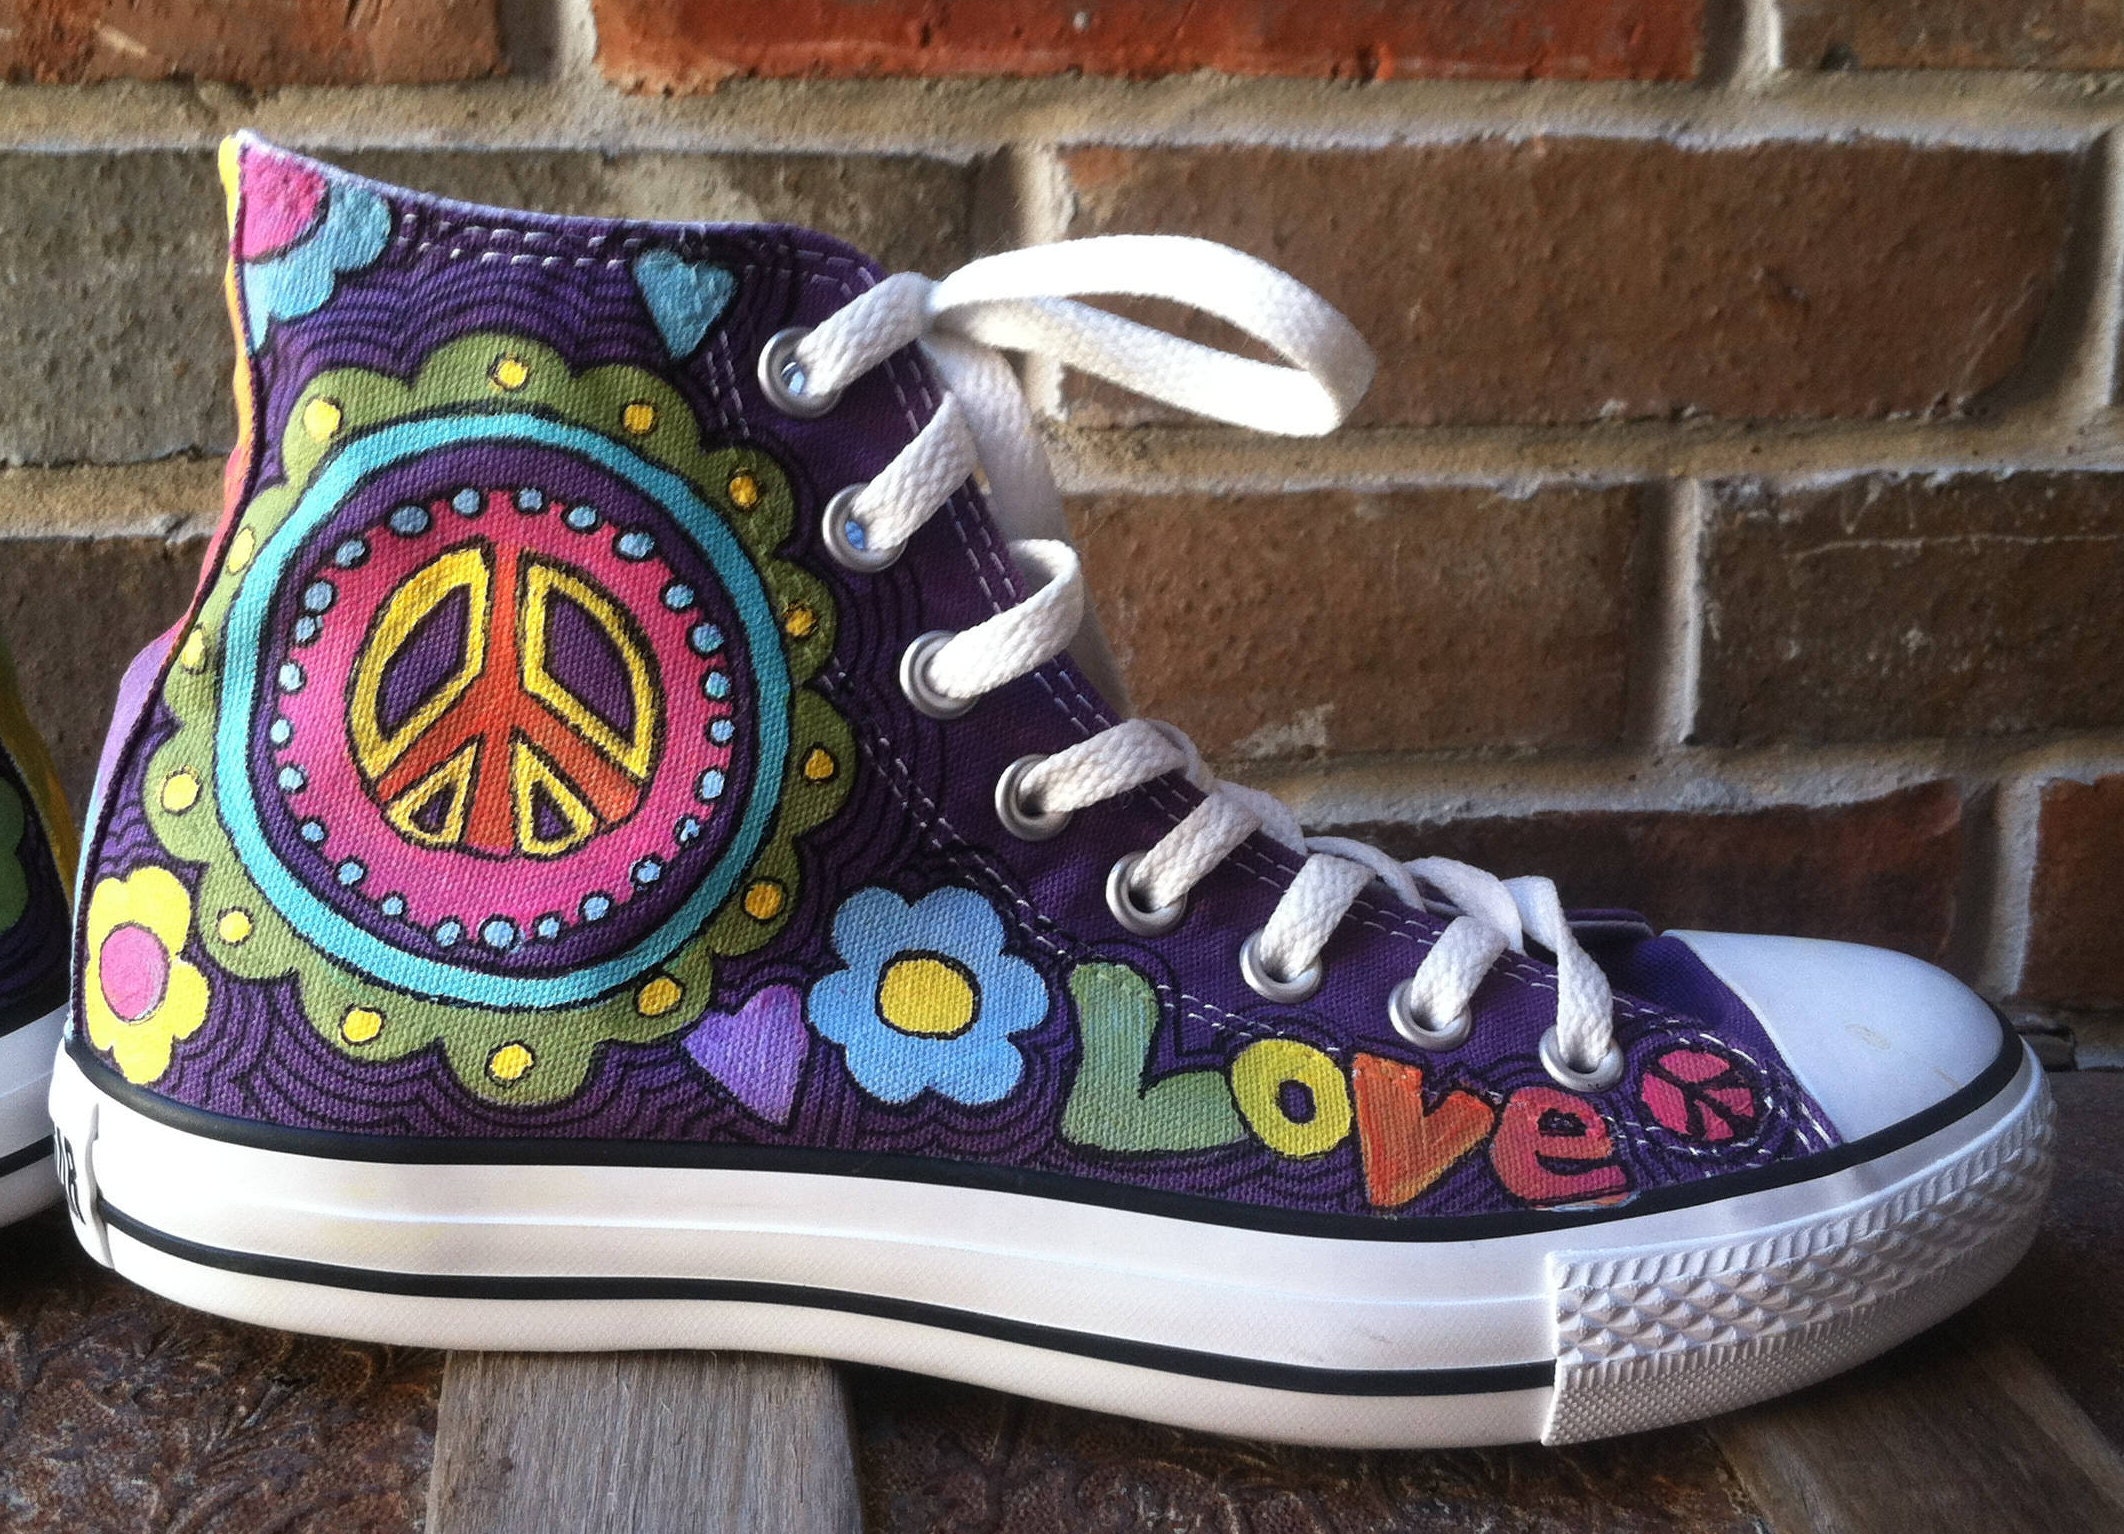 Converse Shoes Converse High Tops Peace Signs and Love - Etsy